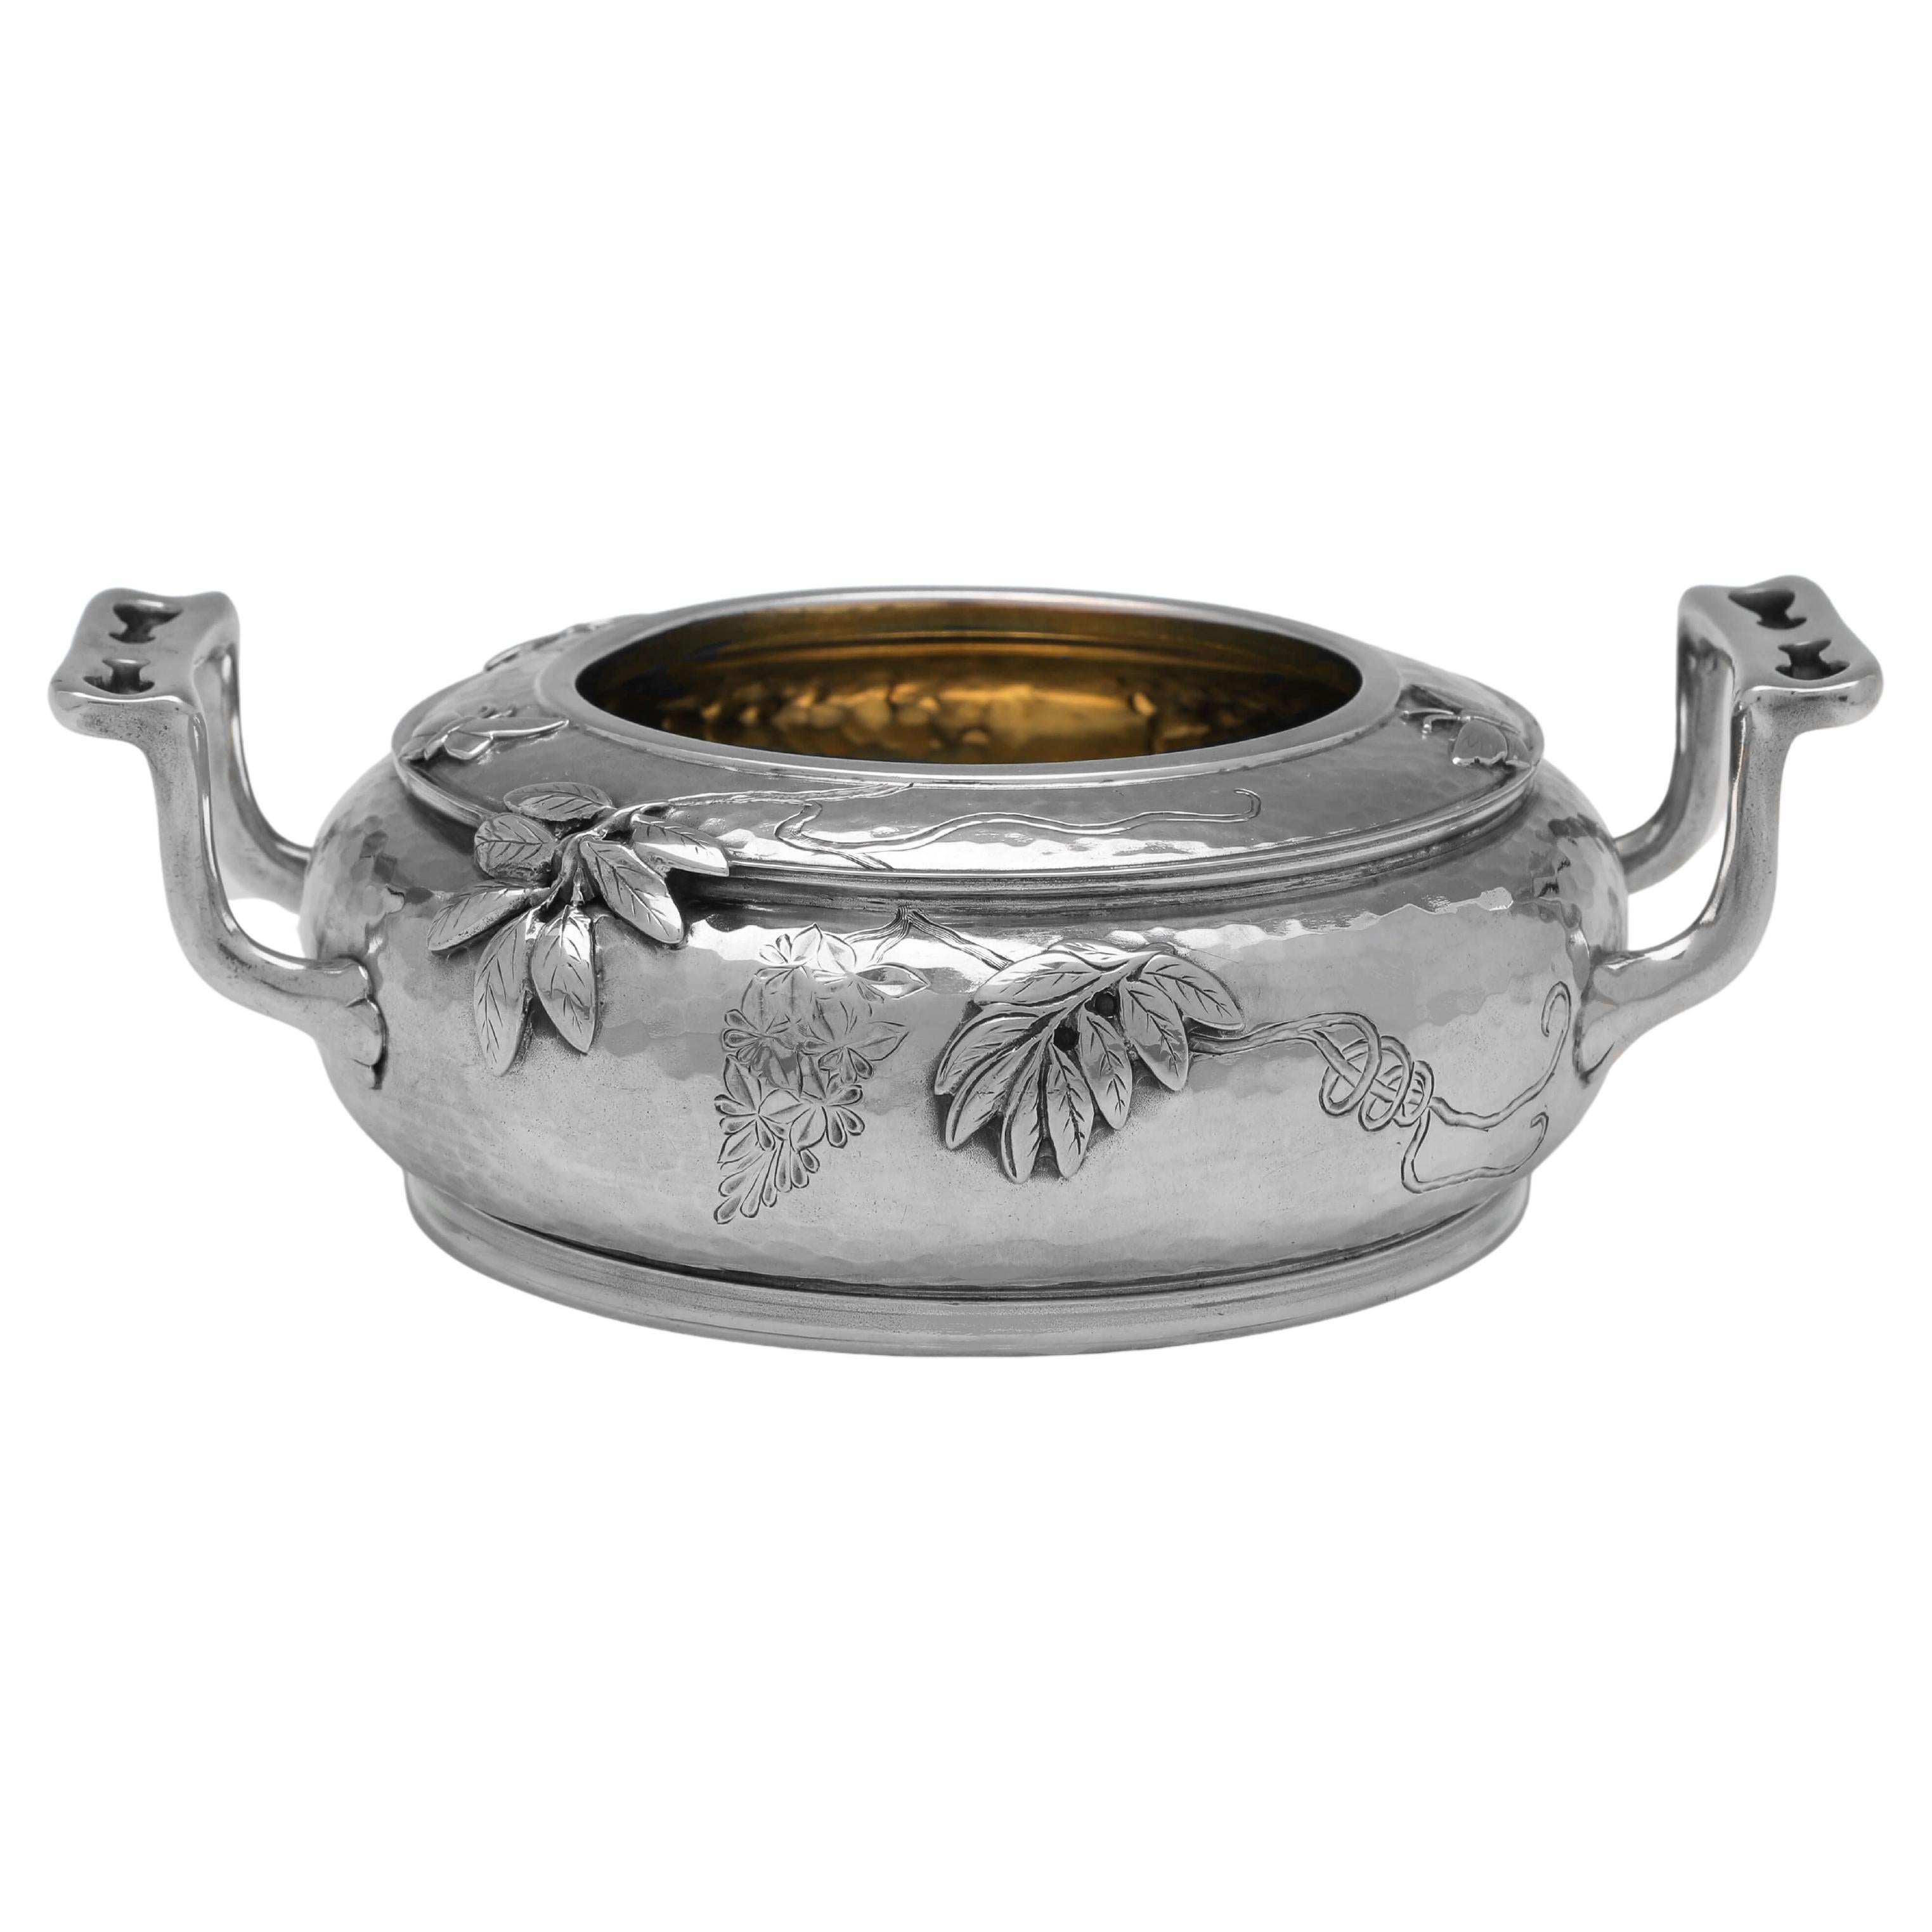 Aesthetic Period & Design English Sterling Silver Bowl, London 1879 For Sale